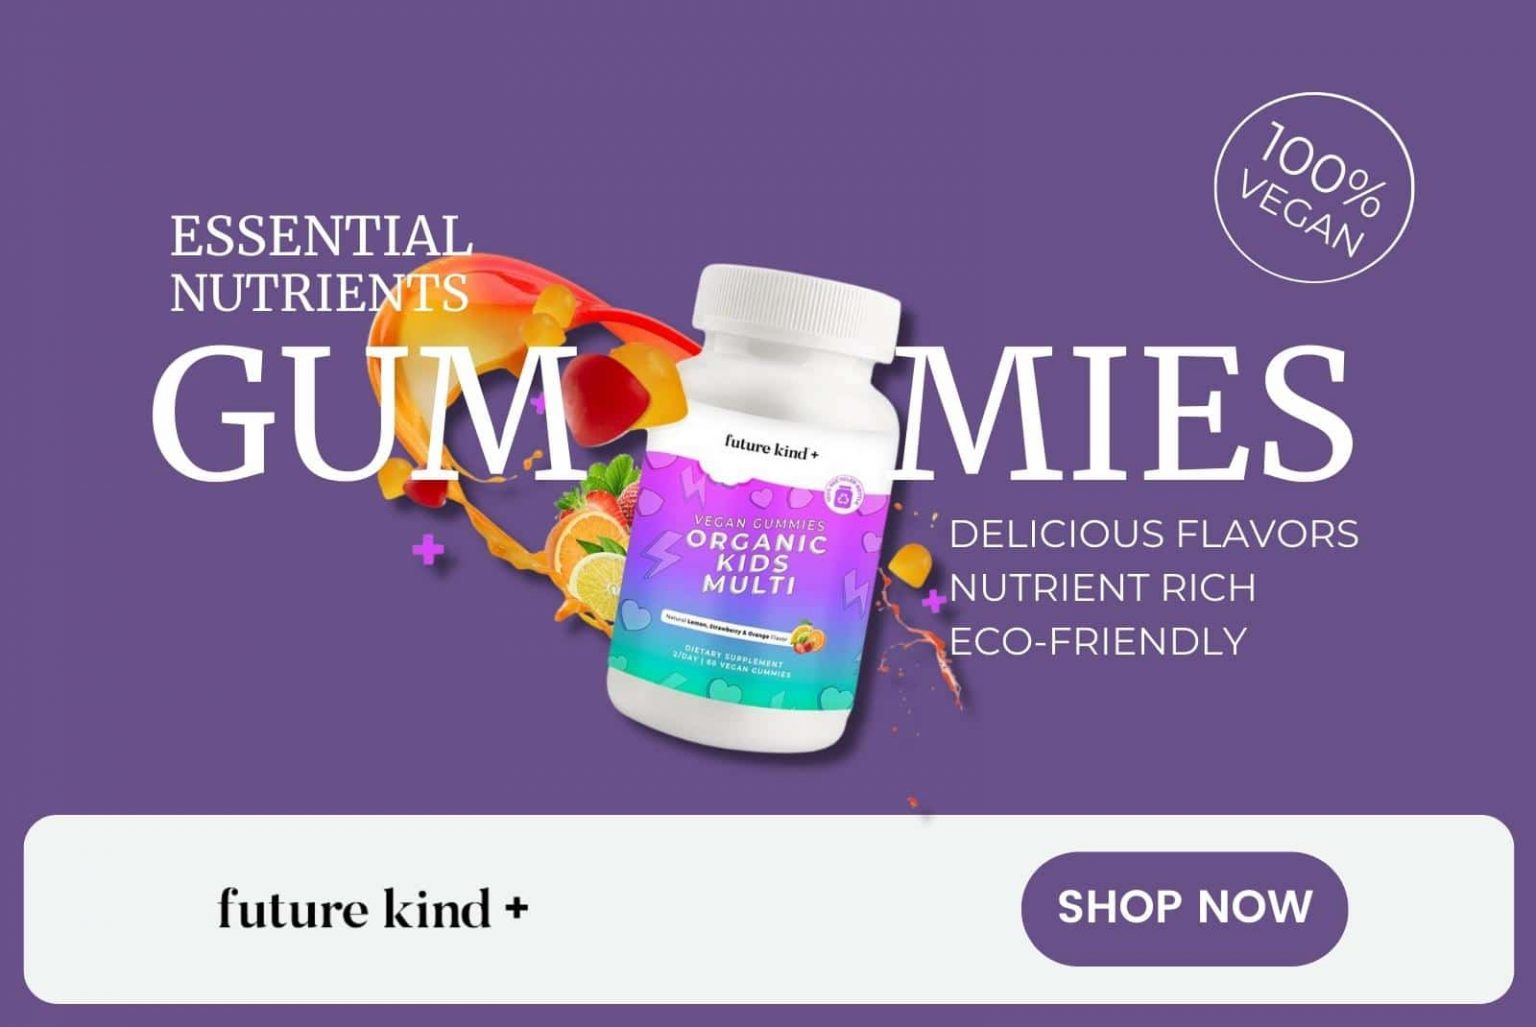 Future kind+ delicious gummy vitamins and gummy multivitamins, cover all your vegan essential nutrient needs.